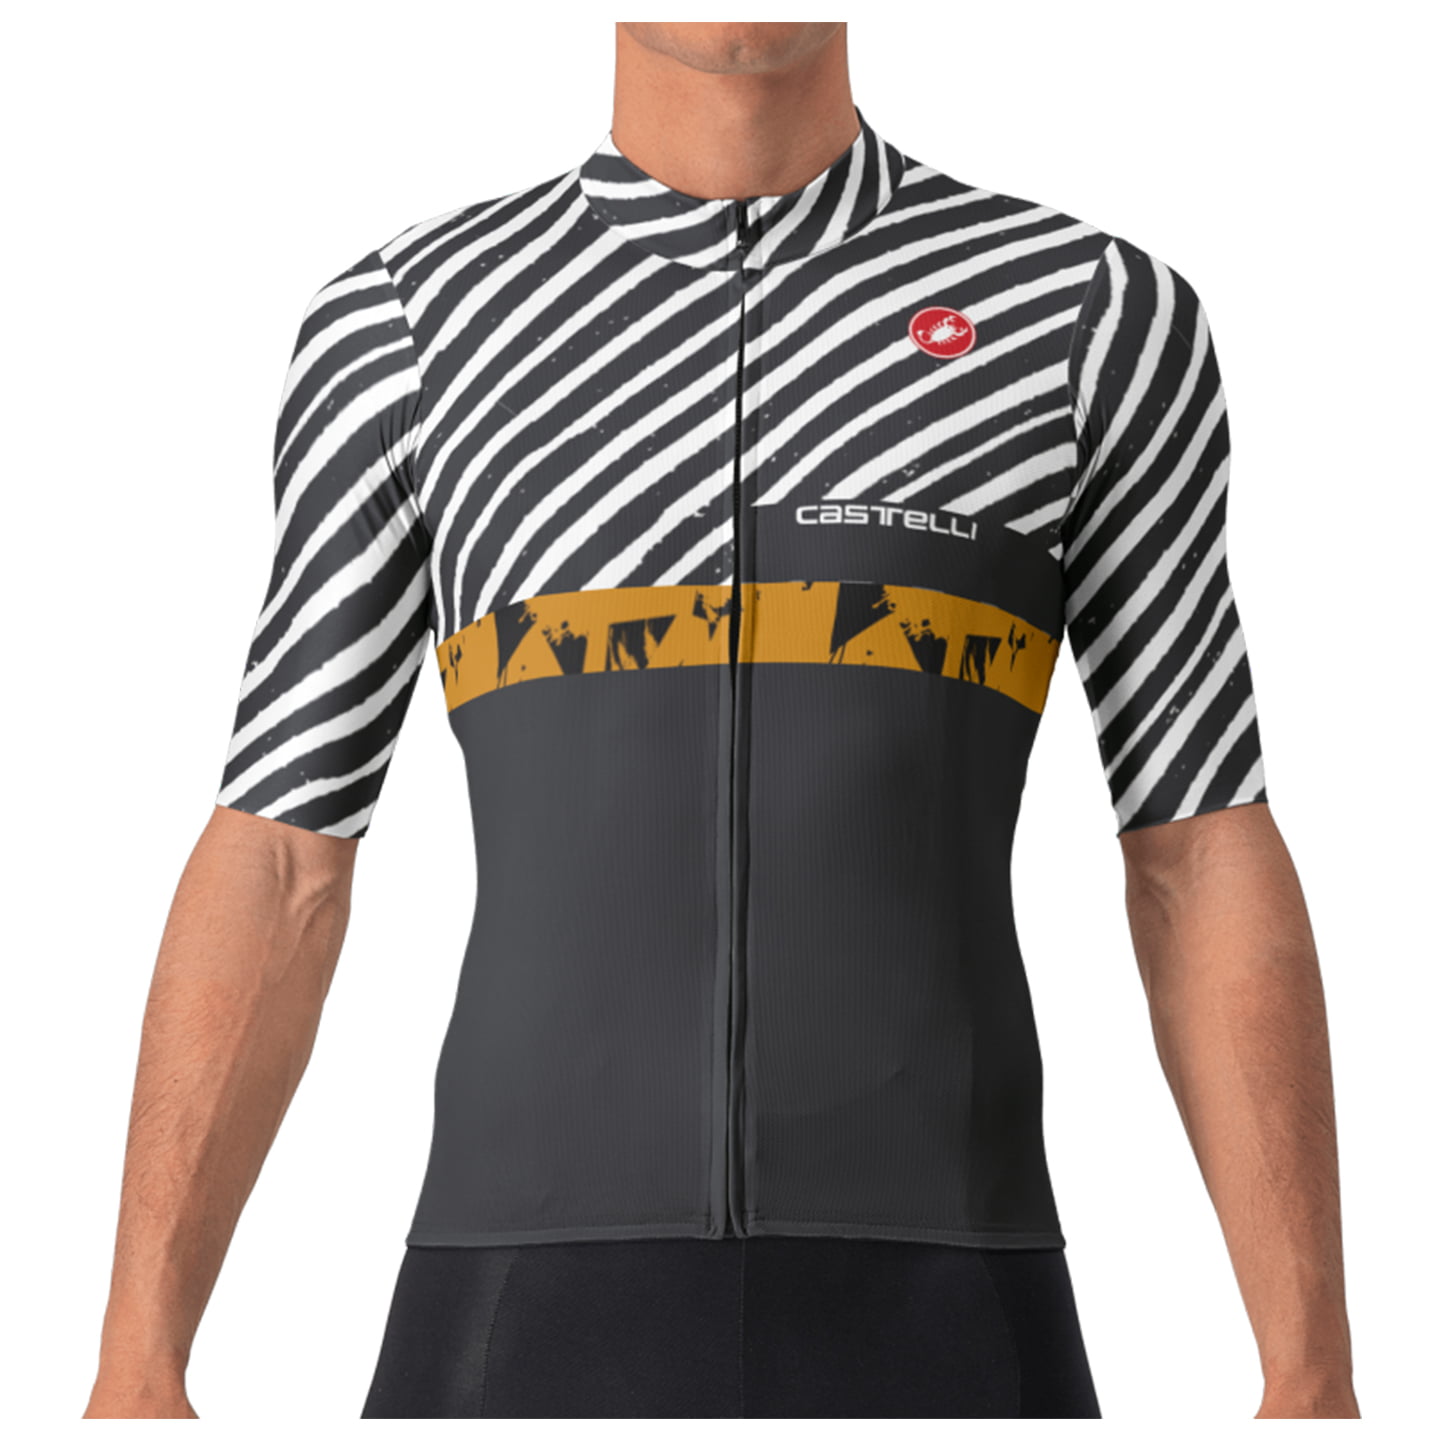 CASTELLI Diagon Short Sleeve Jersey, for men, size L, Cycling jersey, Cycling clothing